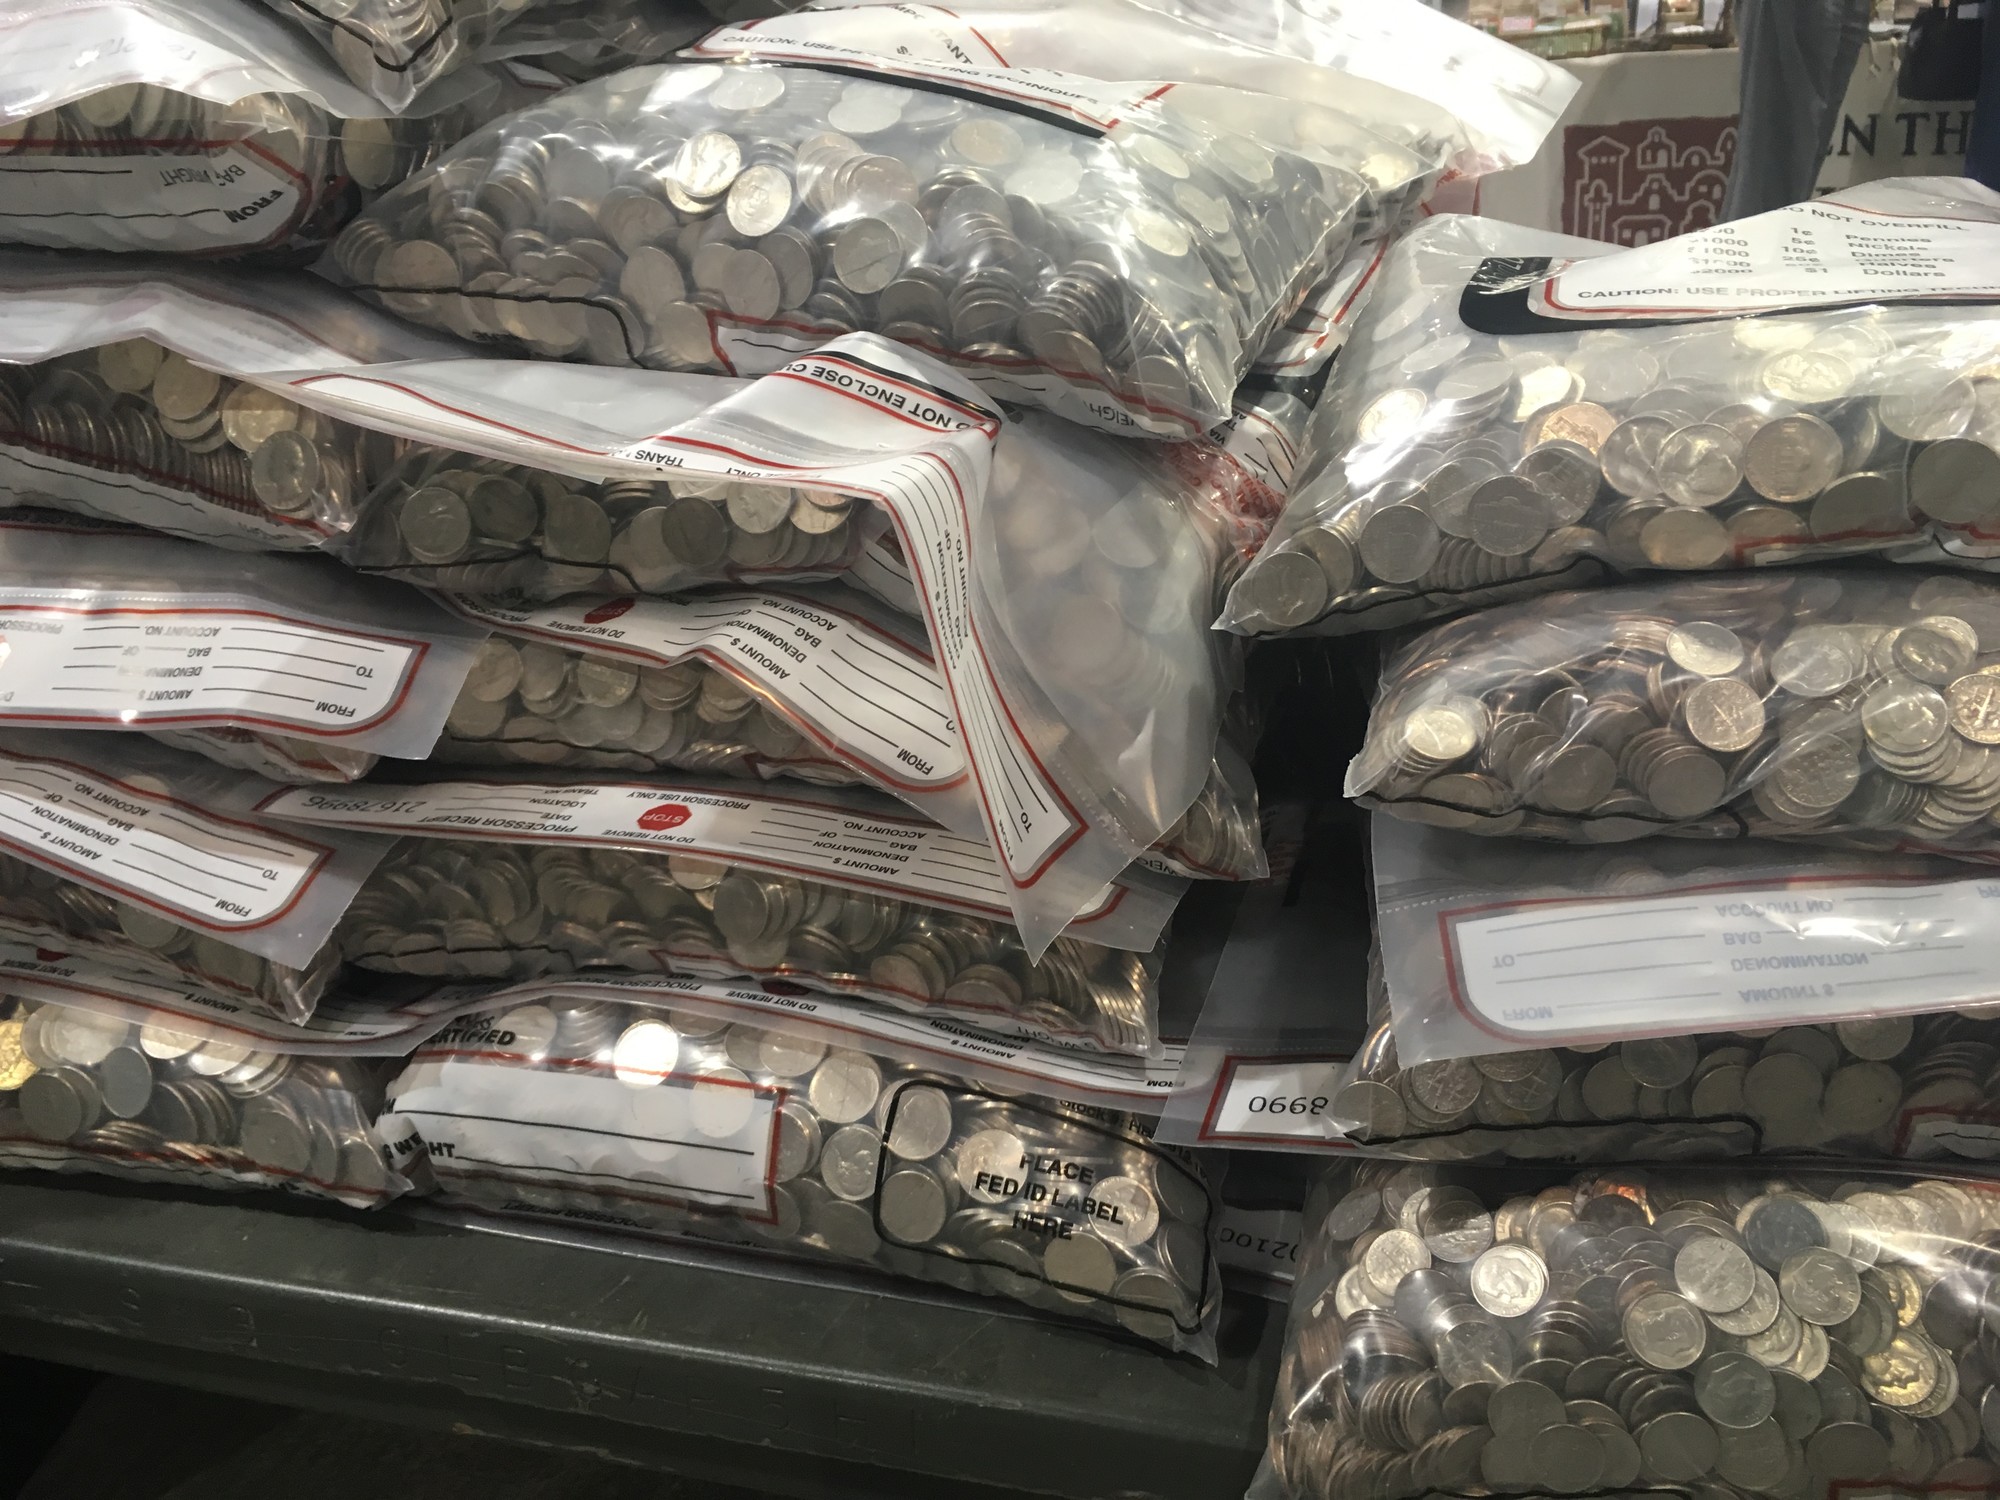 Piles of plastic bags filled with coins